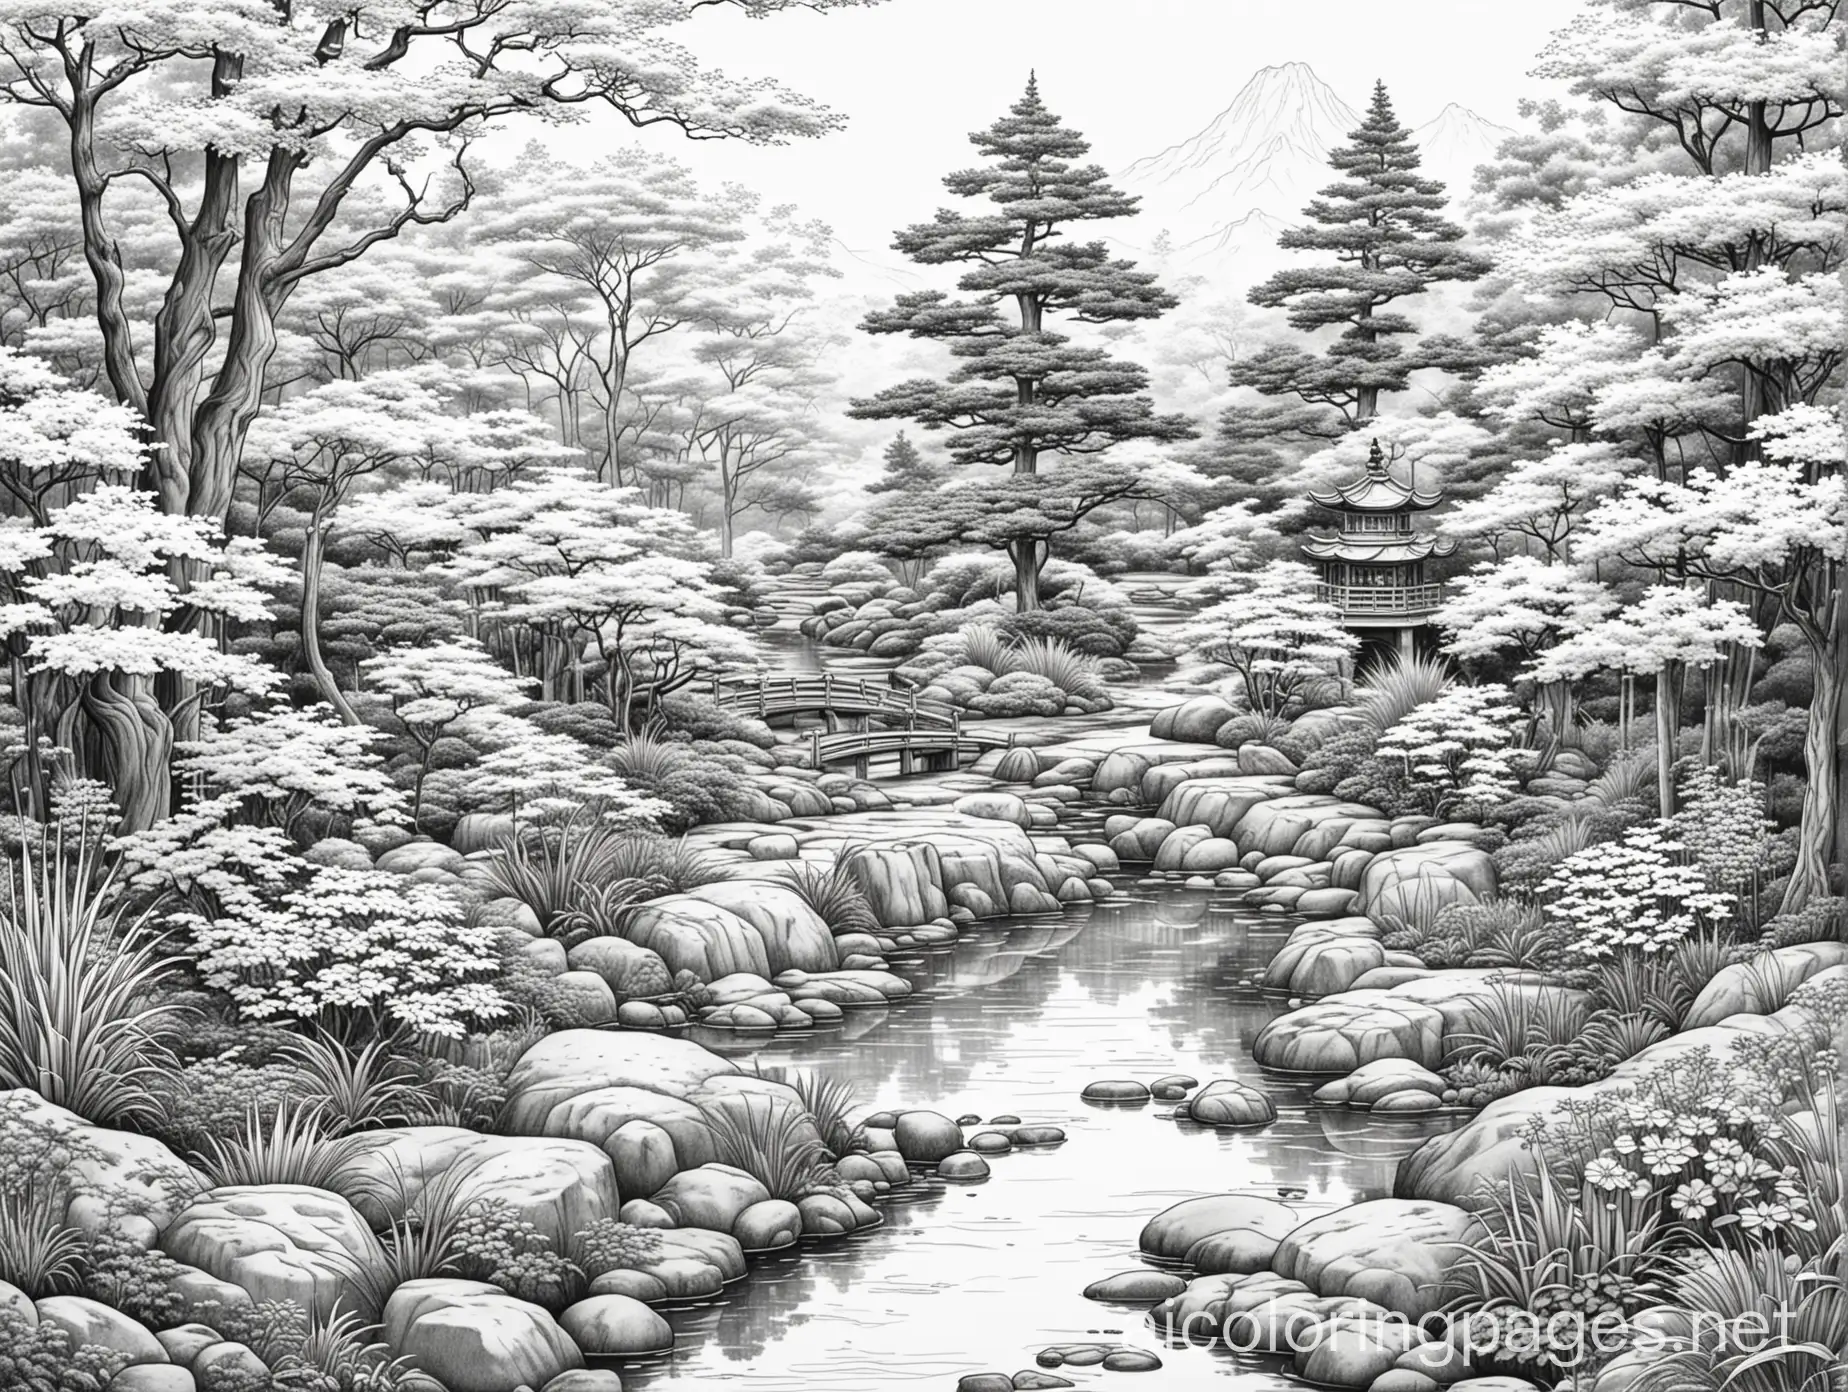 A random realistic Japanese garden with a vertical view as a coloring book page, Coloring Page, black and white, line art, white background, Simplicity, Ample White Space. The background of the coloring page is plain white to make it easy for young children to color within the lines. The outlines of all the subjects are easy to distinguish, making it simple for kids to color without too much difficulty